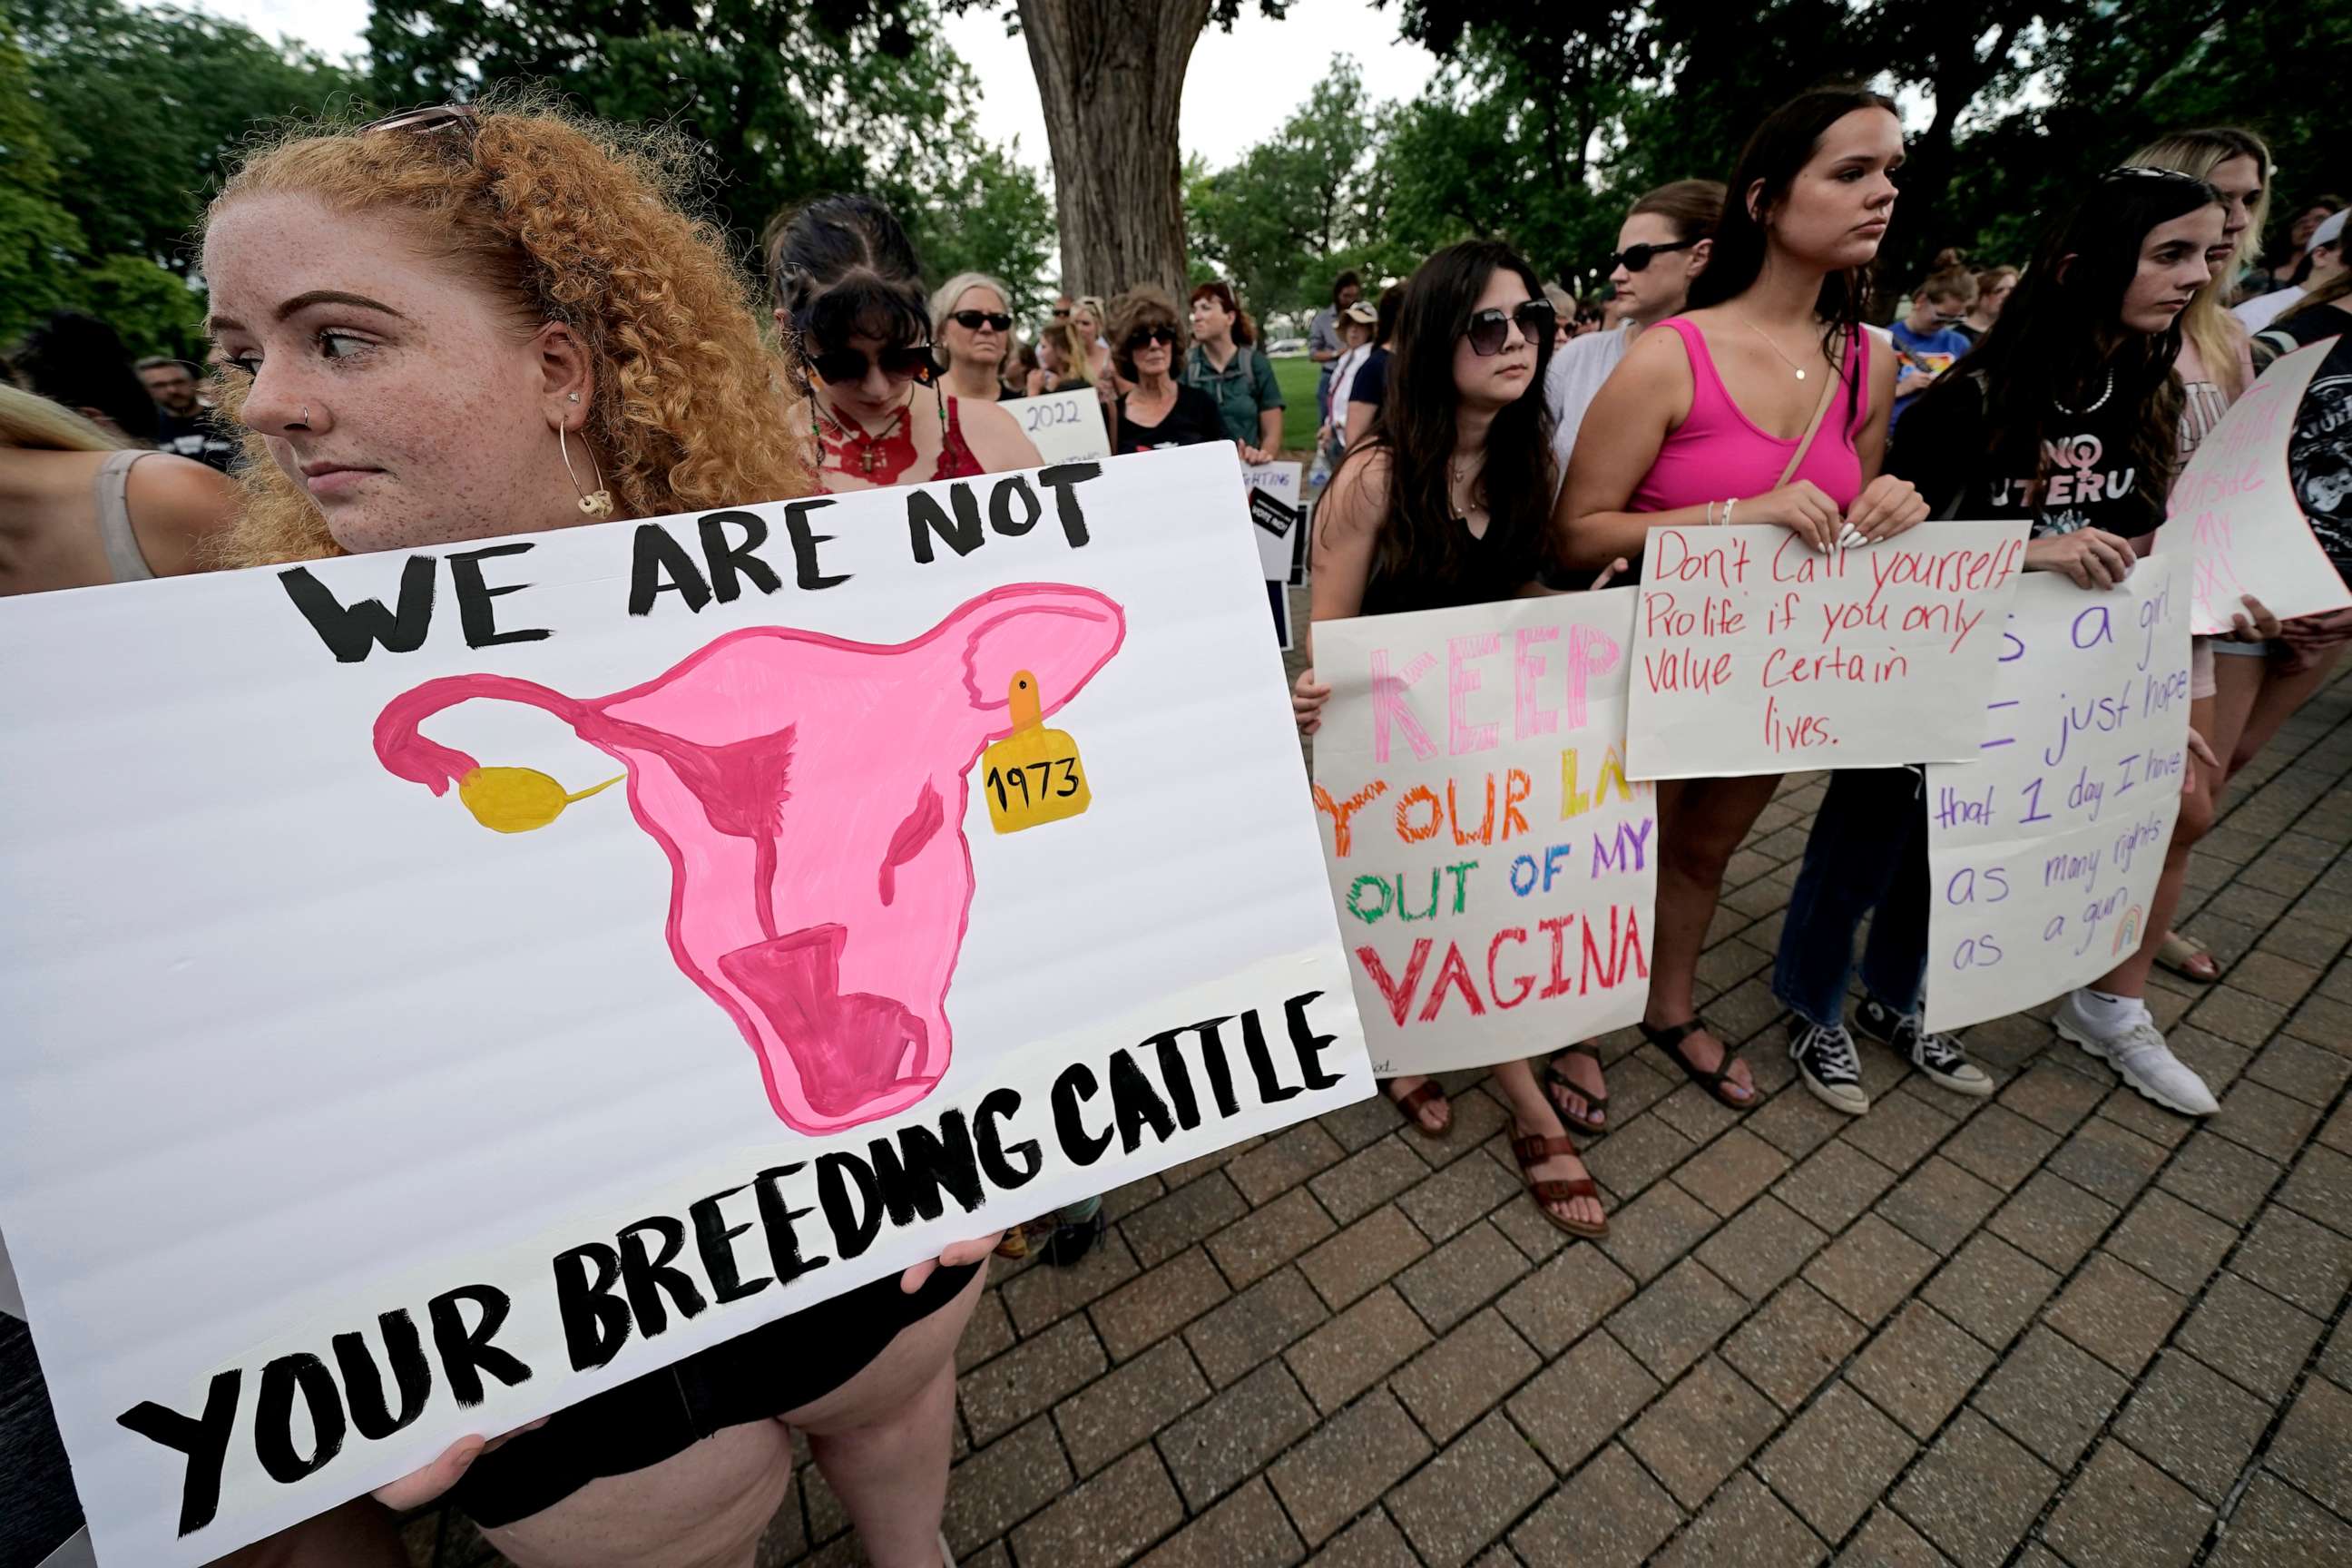 PHOTO: Abortion-rights advocates gather outside a the Kansas Statehouse in Topeka, Kan., to protest the U.S. Supreme Court's ruling on abortion, June 24, 2022.